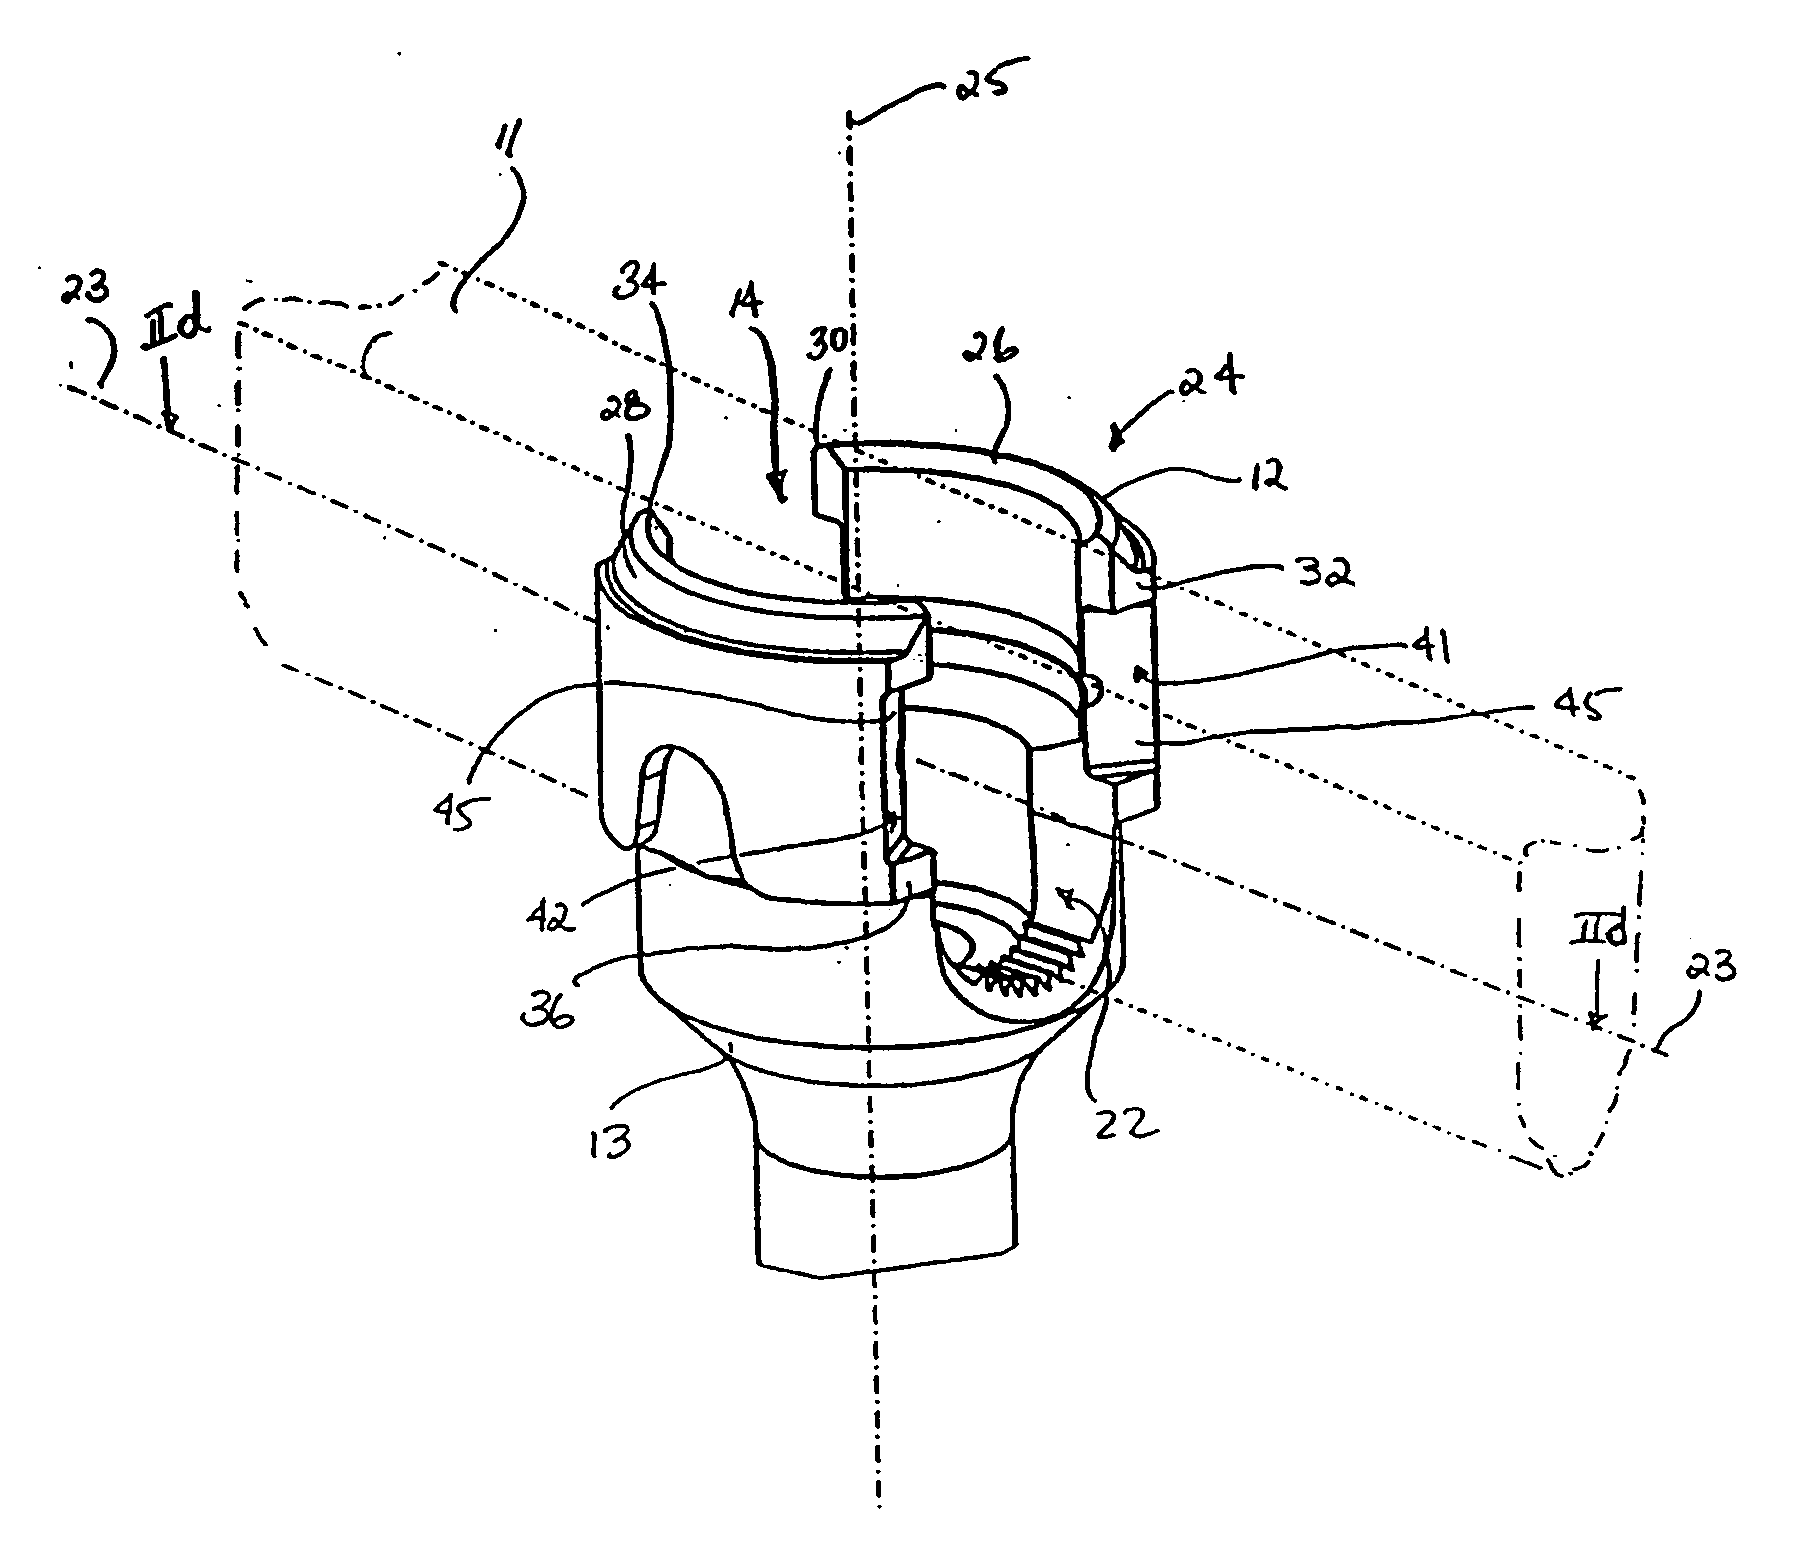 Top loading spinal fixation device and instruments for loading and handling the same